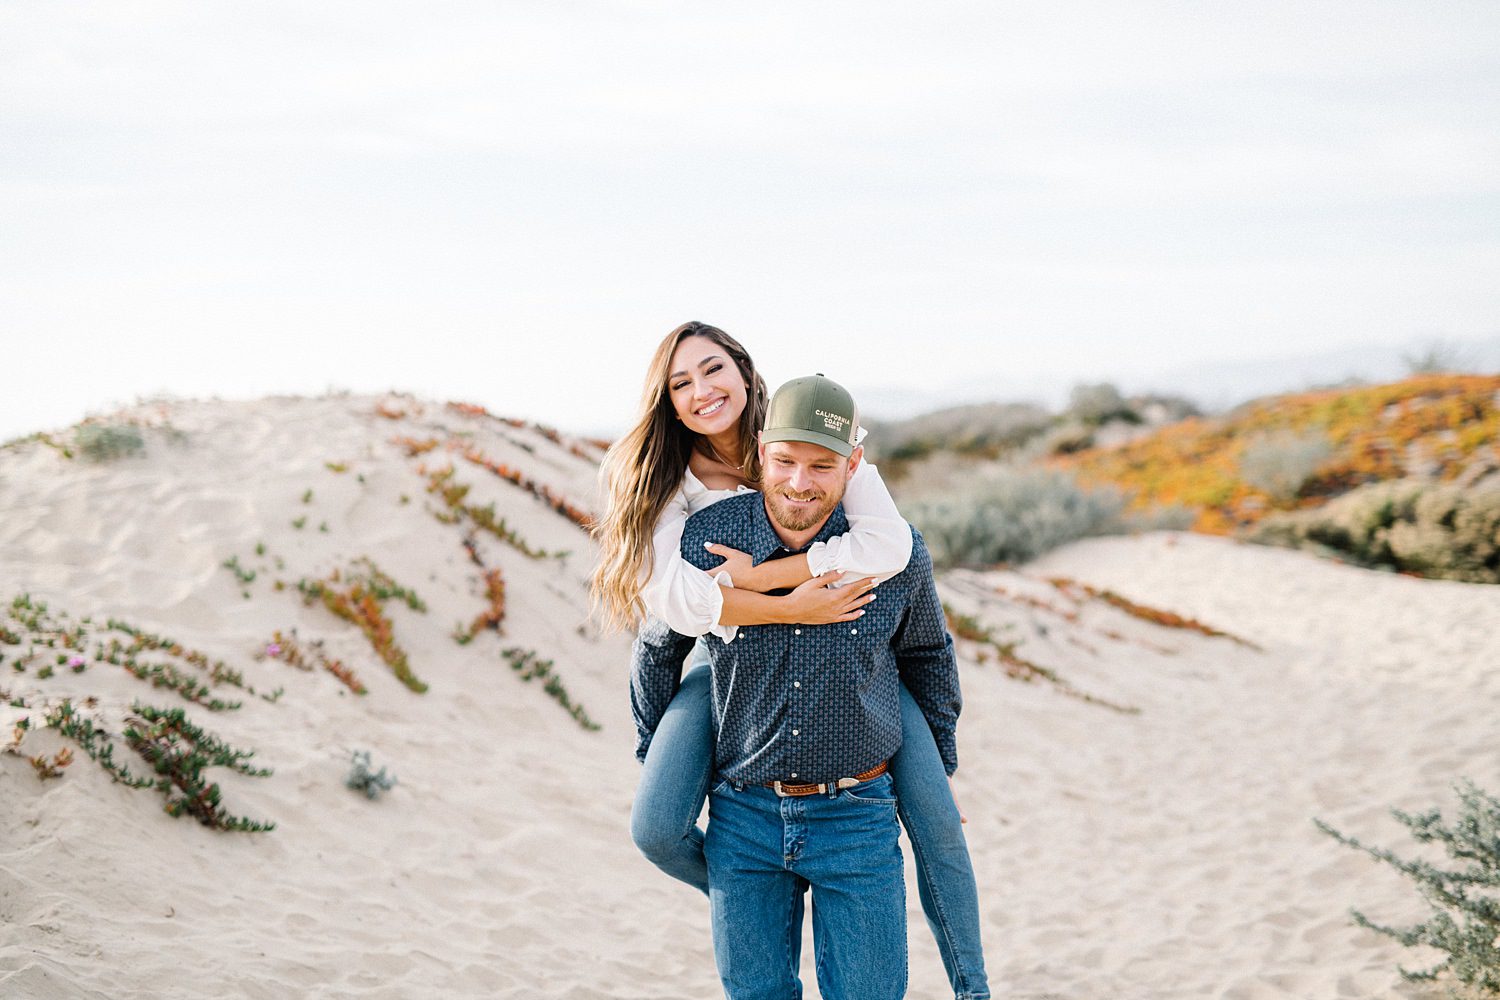 Engagement piggy back ride at Pismo Beach Dunes by Pismo Beach Engagement Photographer Austyn Elizabeth Photography